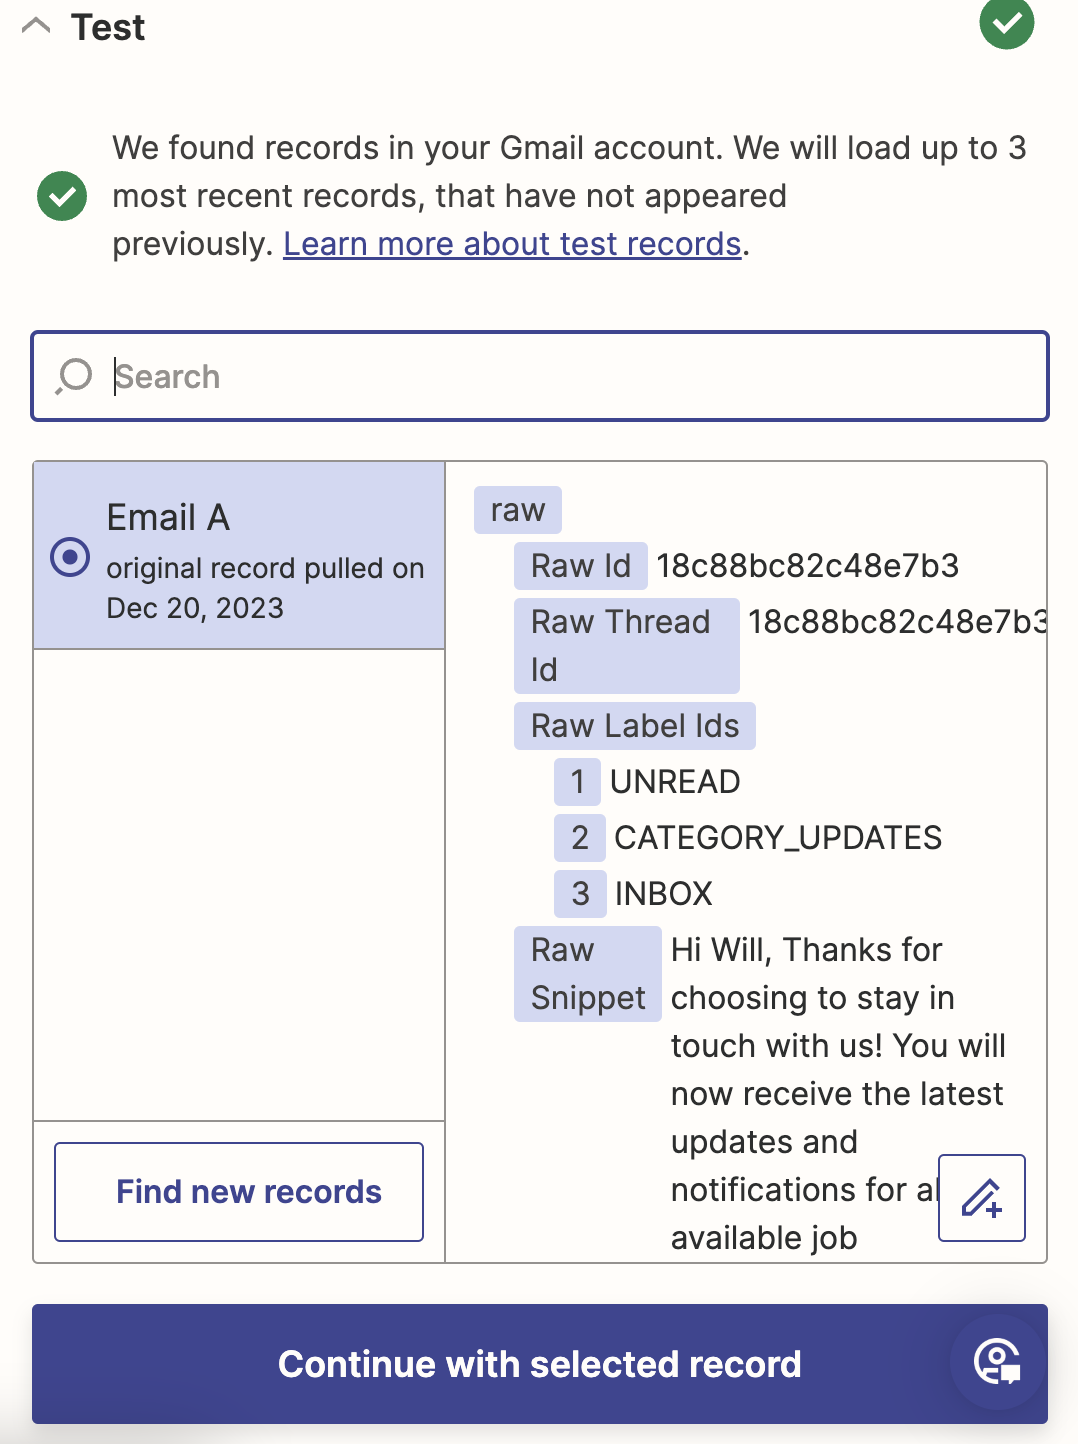 A screenshot of the Zap editor, with sample information from Gmail previewed.